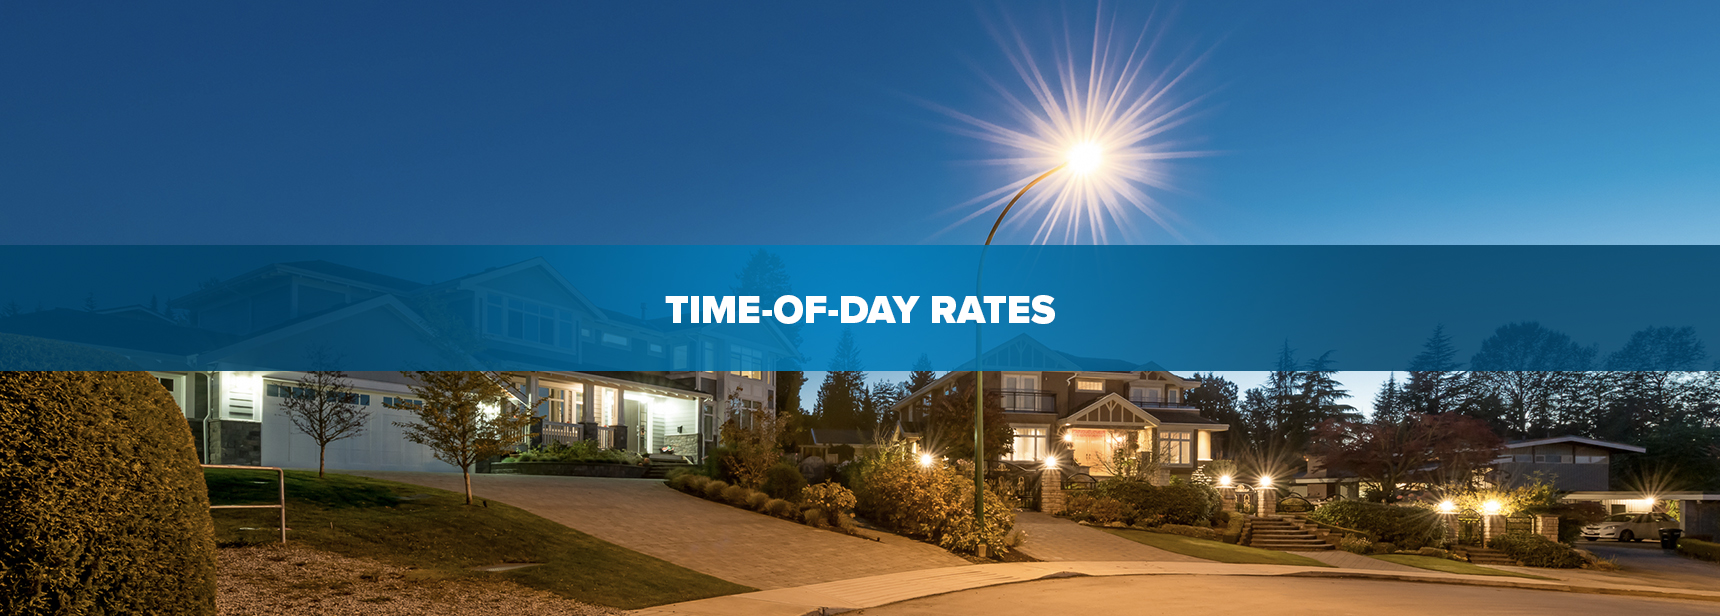 Proposed Time-of-Day Rates